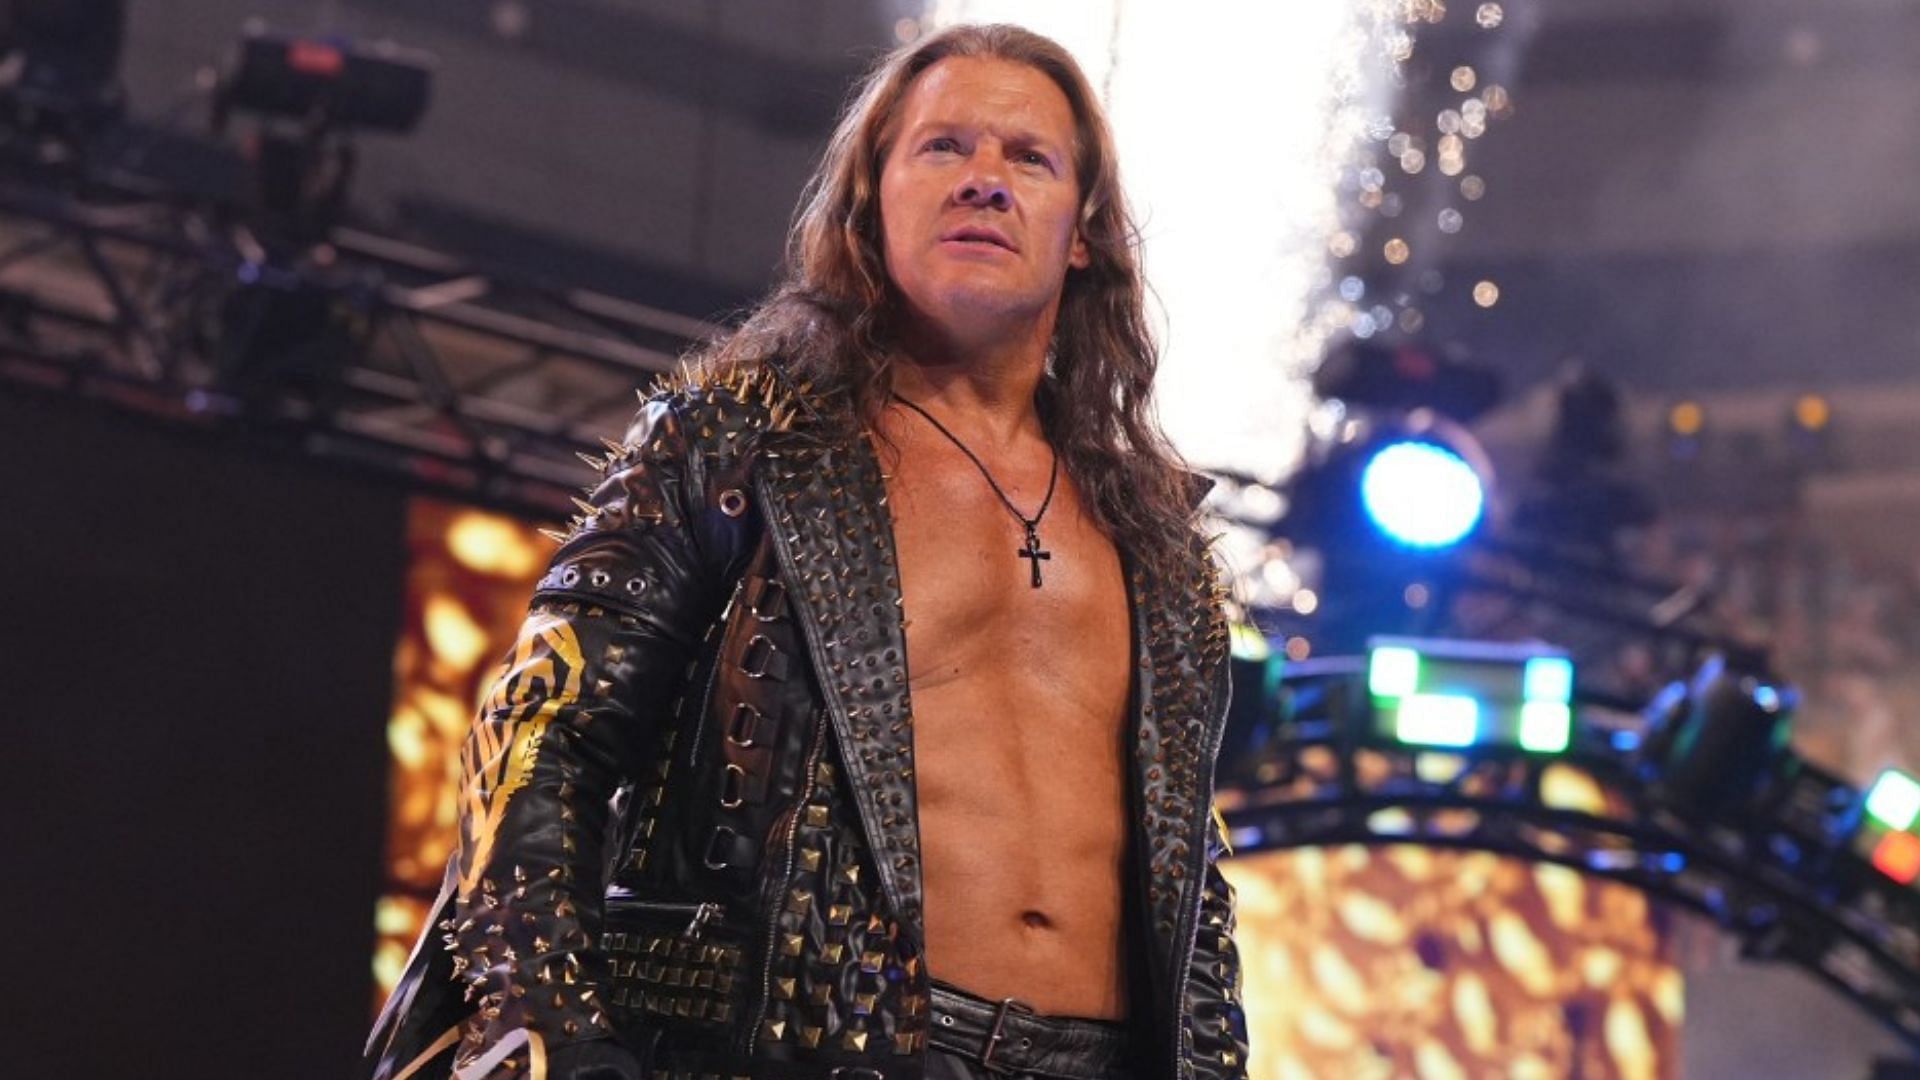 Chris Jericho had some interesting things to say recently